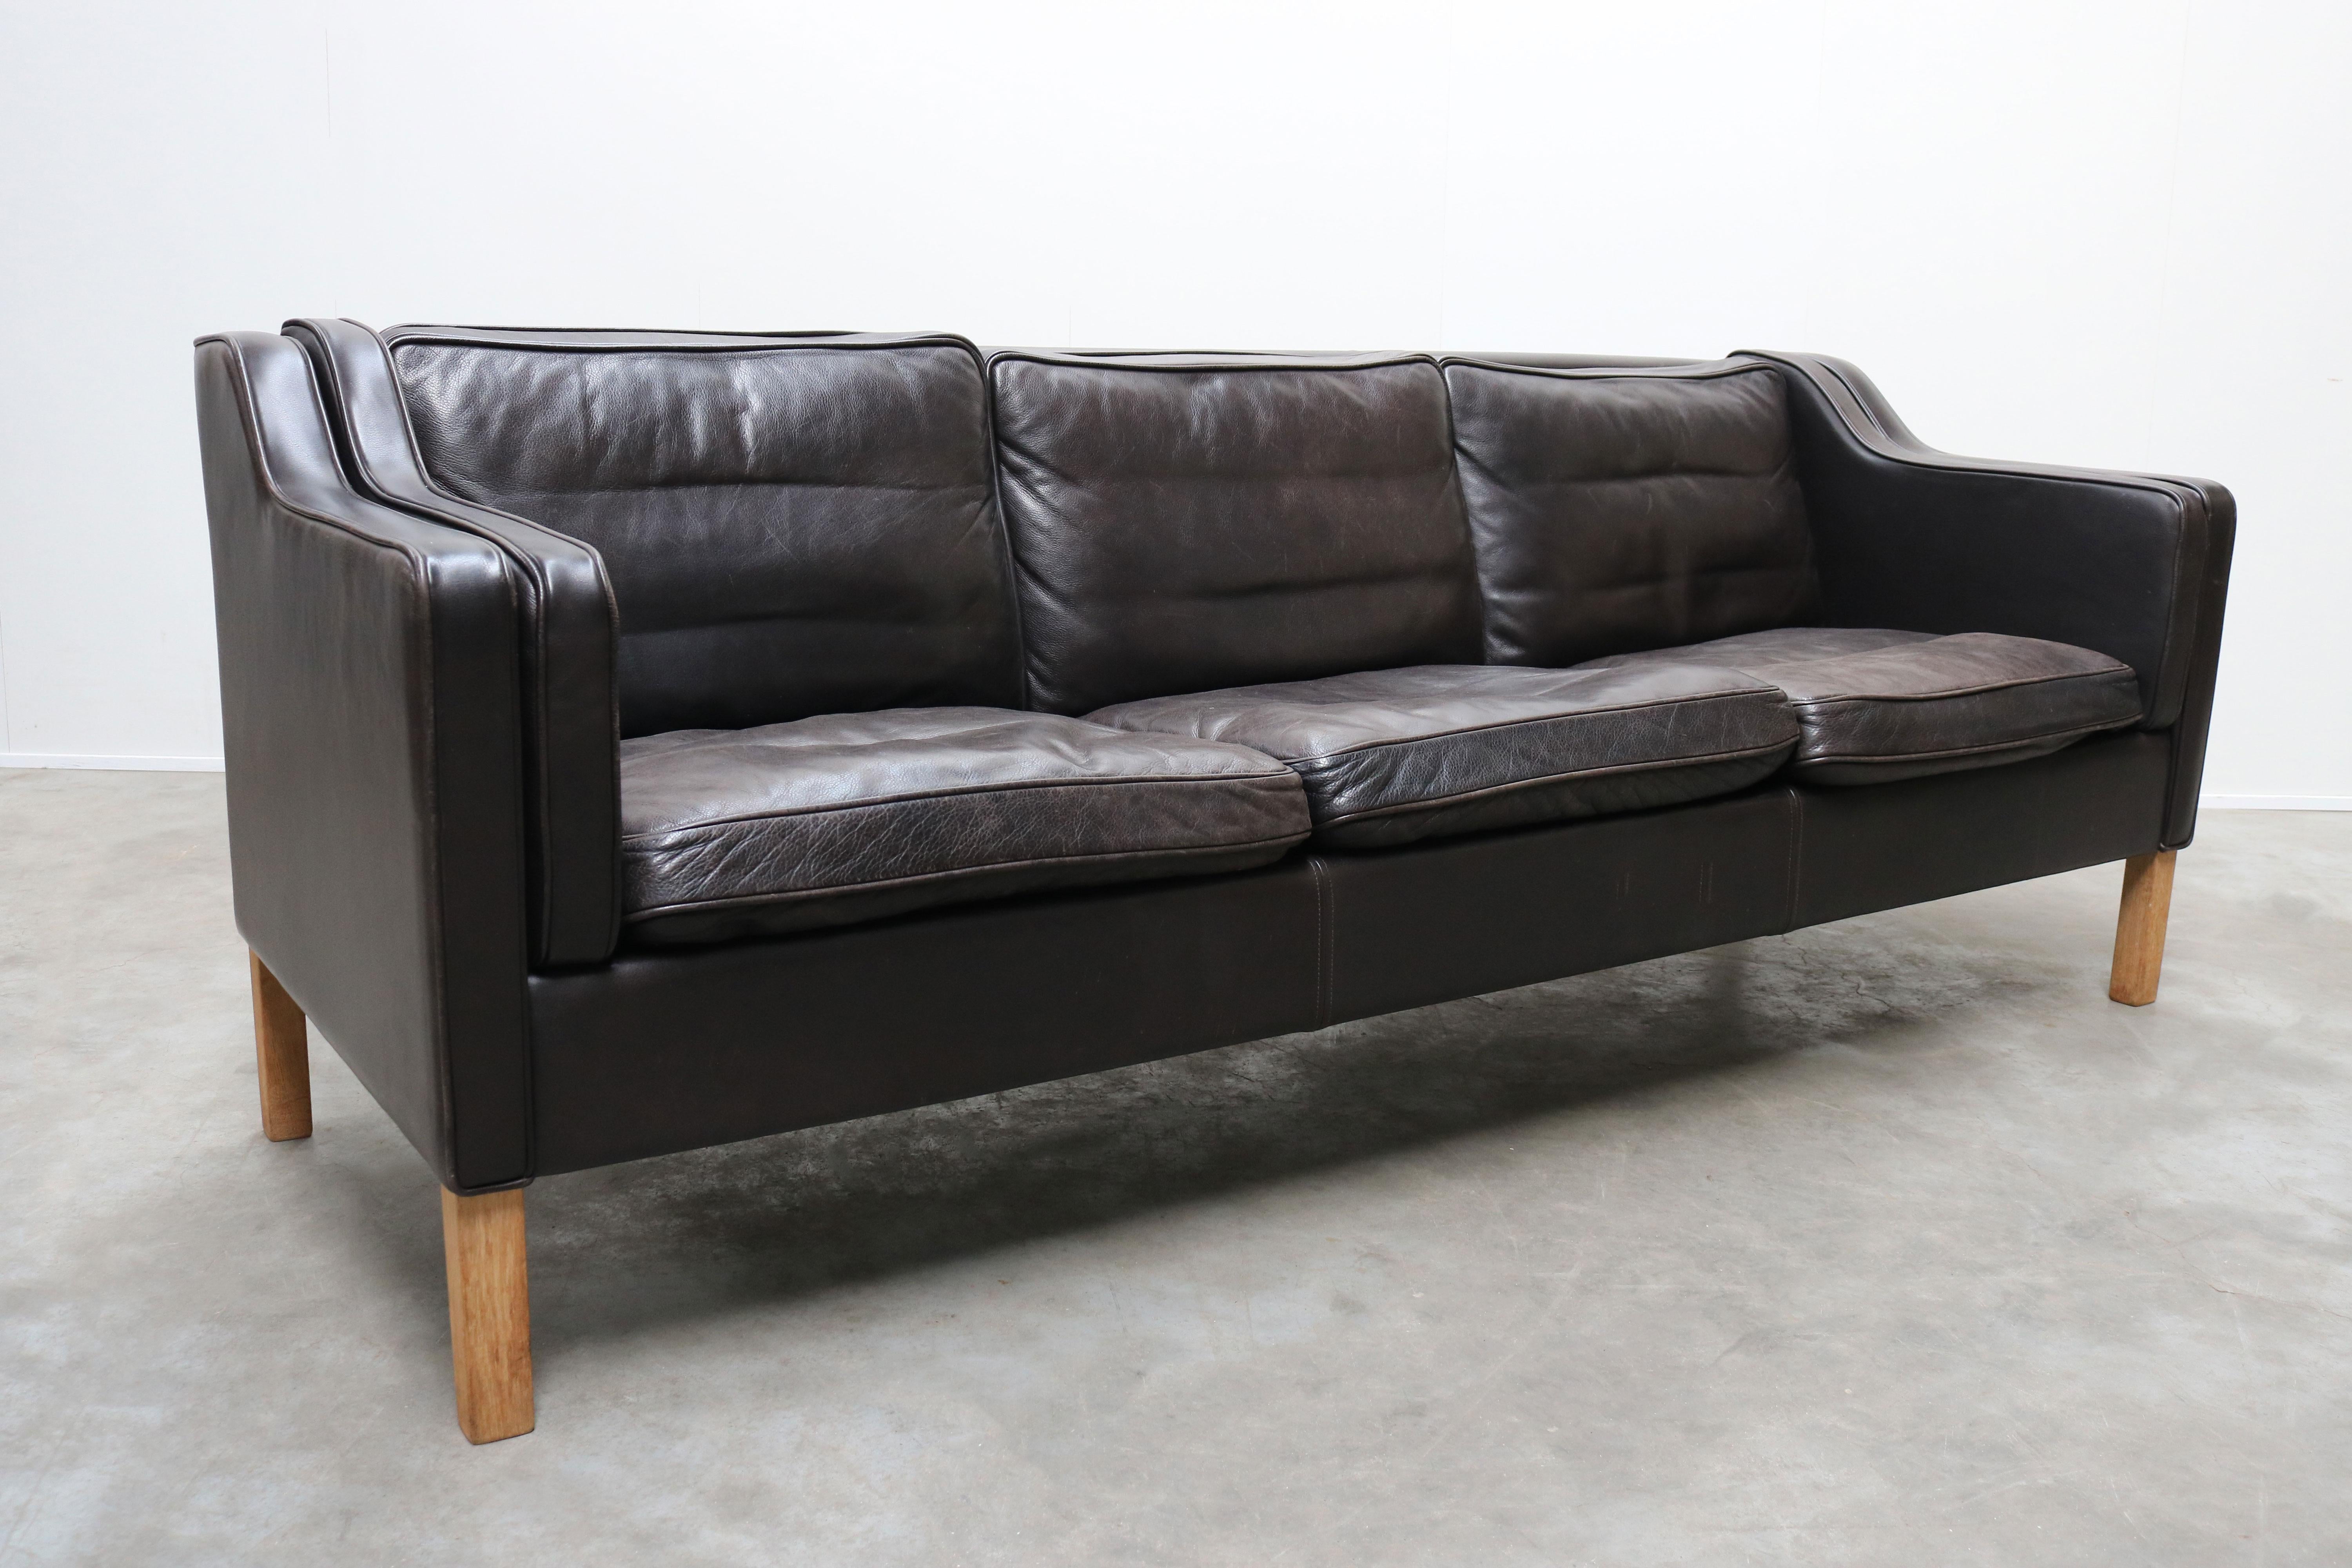 Vintage Black Leather Sofa 2213 by Børge Mogensen for Fredericia 1960 Three-Seat 1